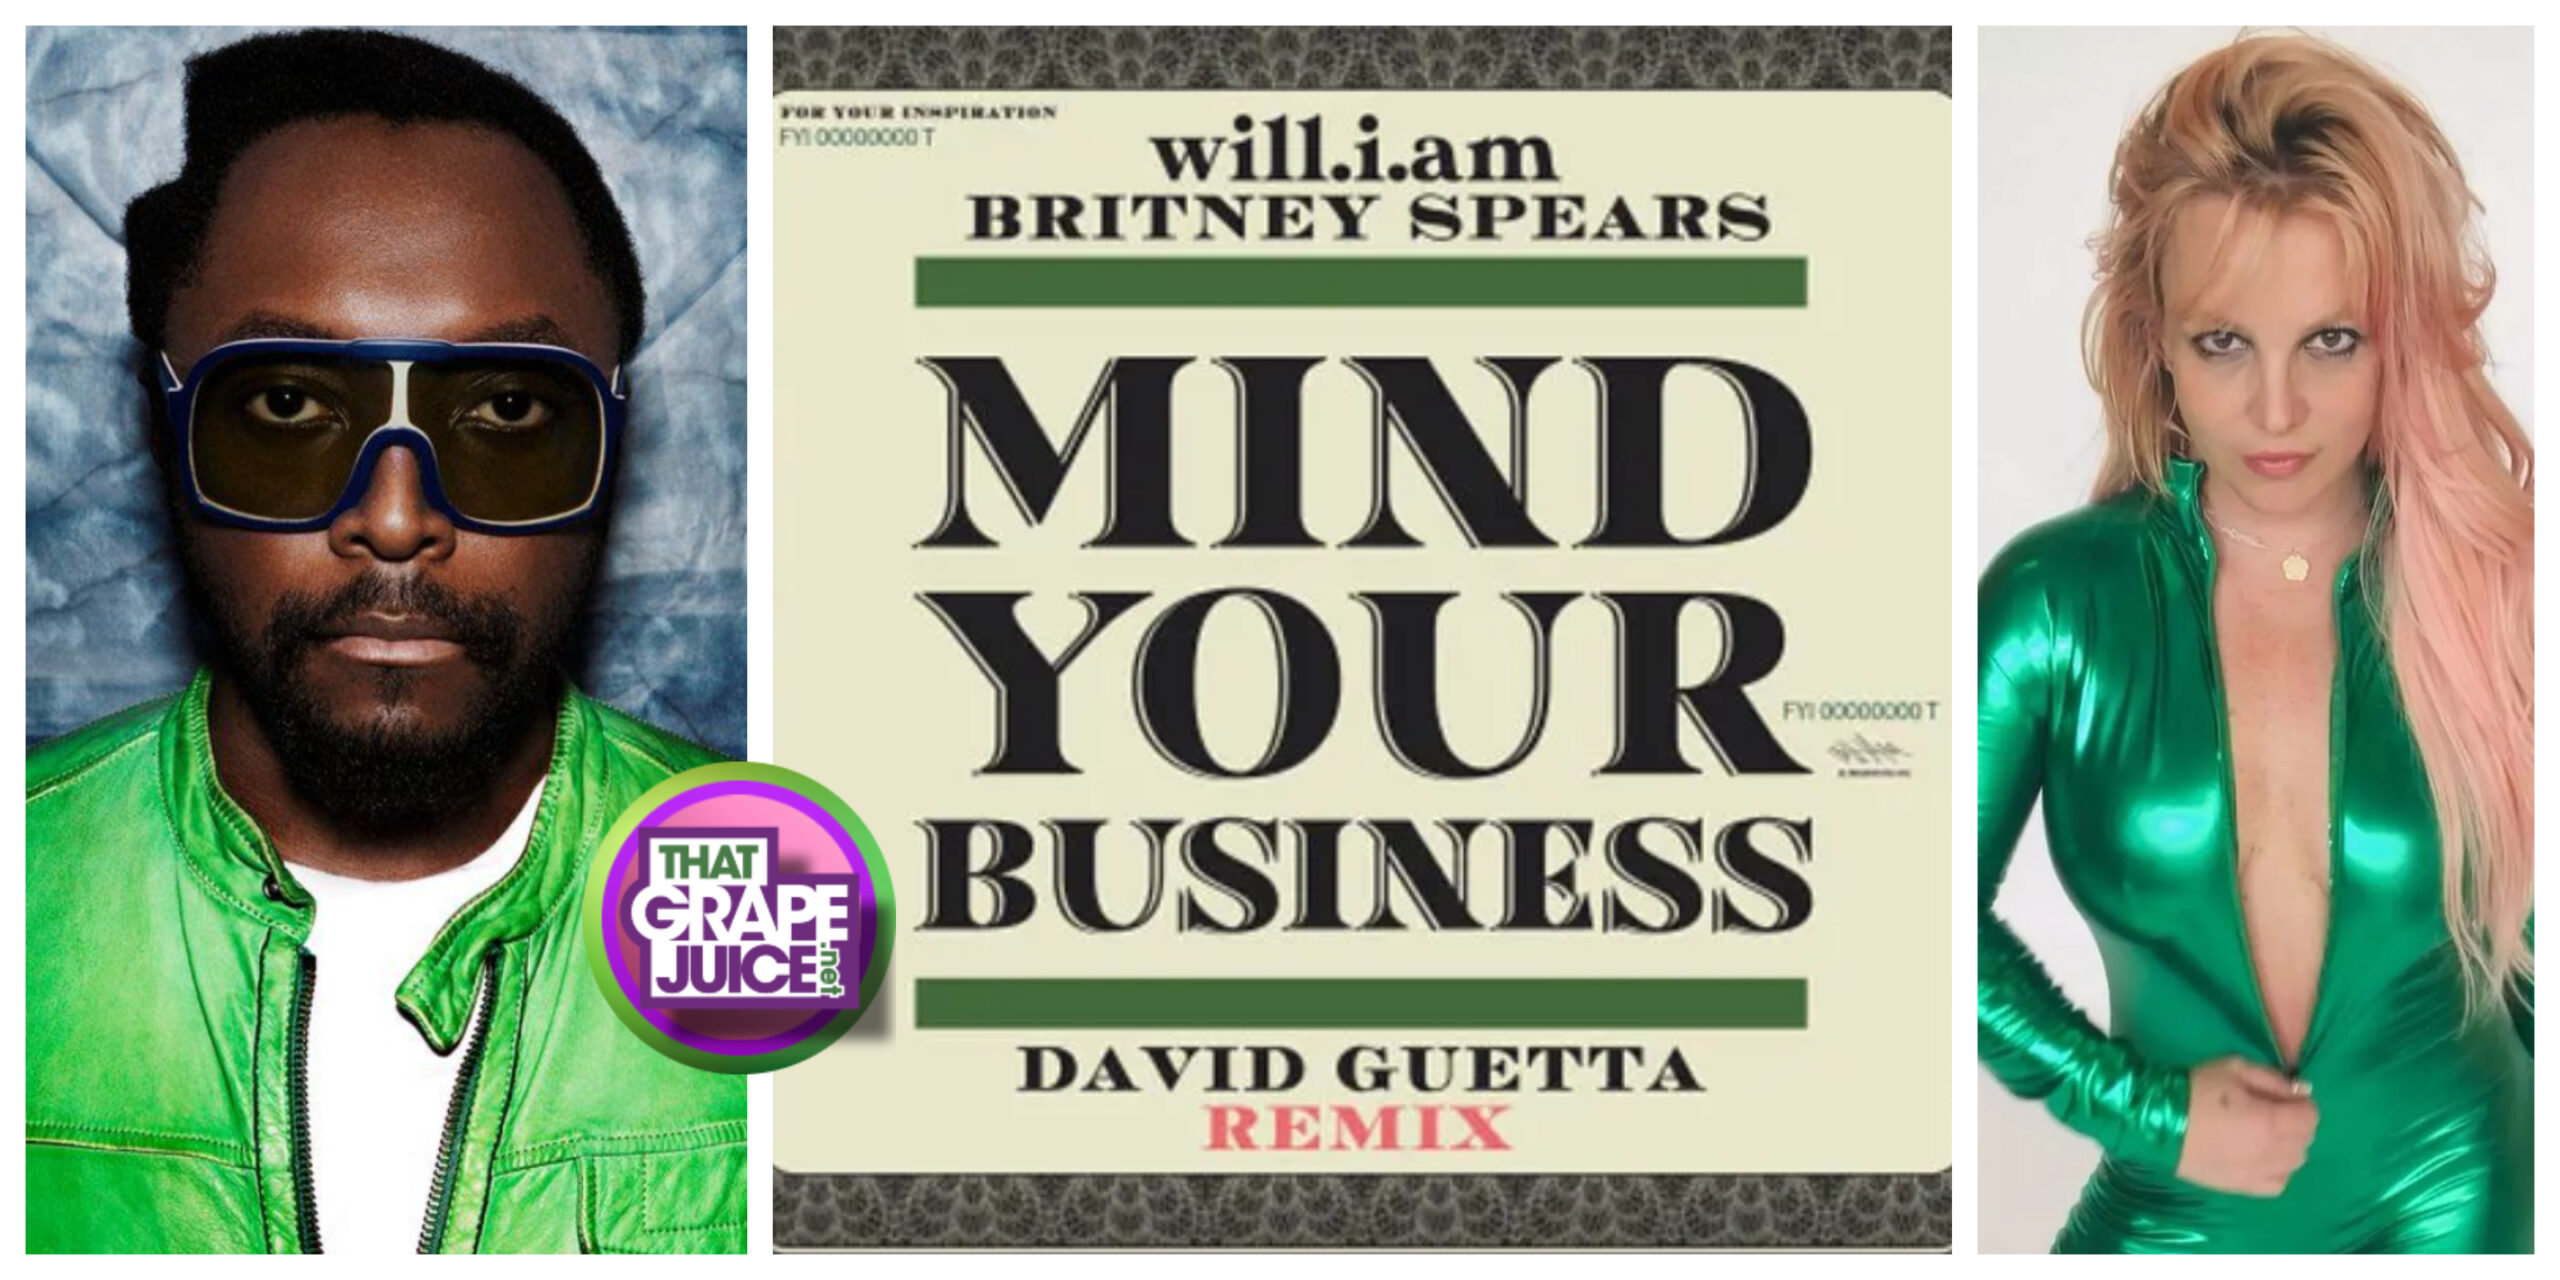 Mind Your Business': Will.i.am Drops New Single With Britney Spears